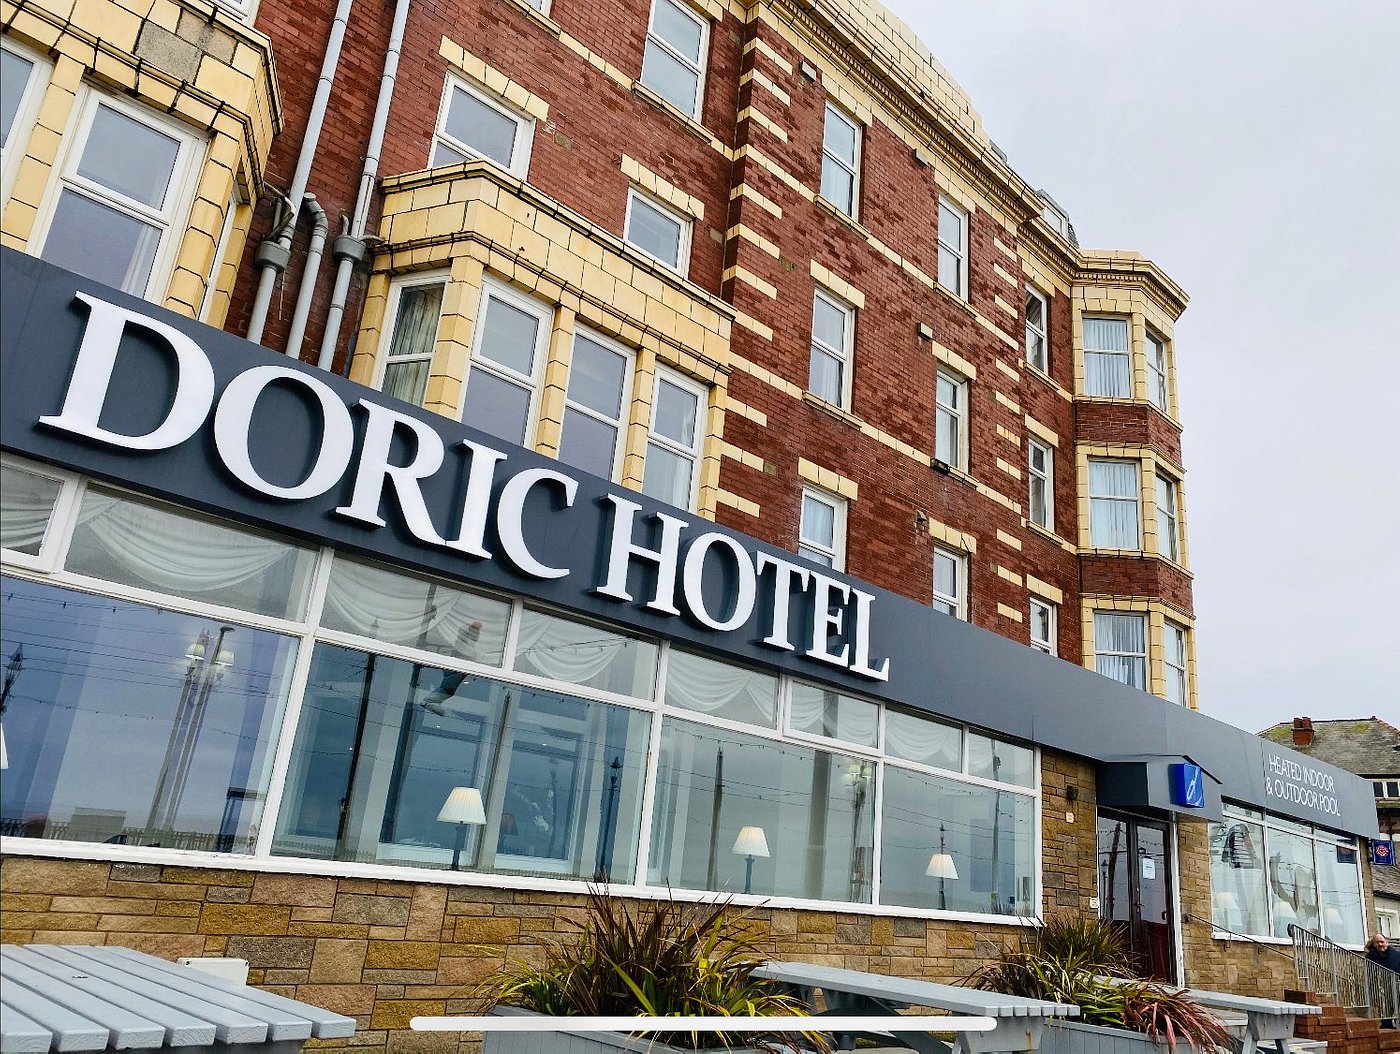 Front of the Doric Hotel